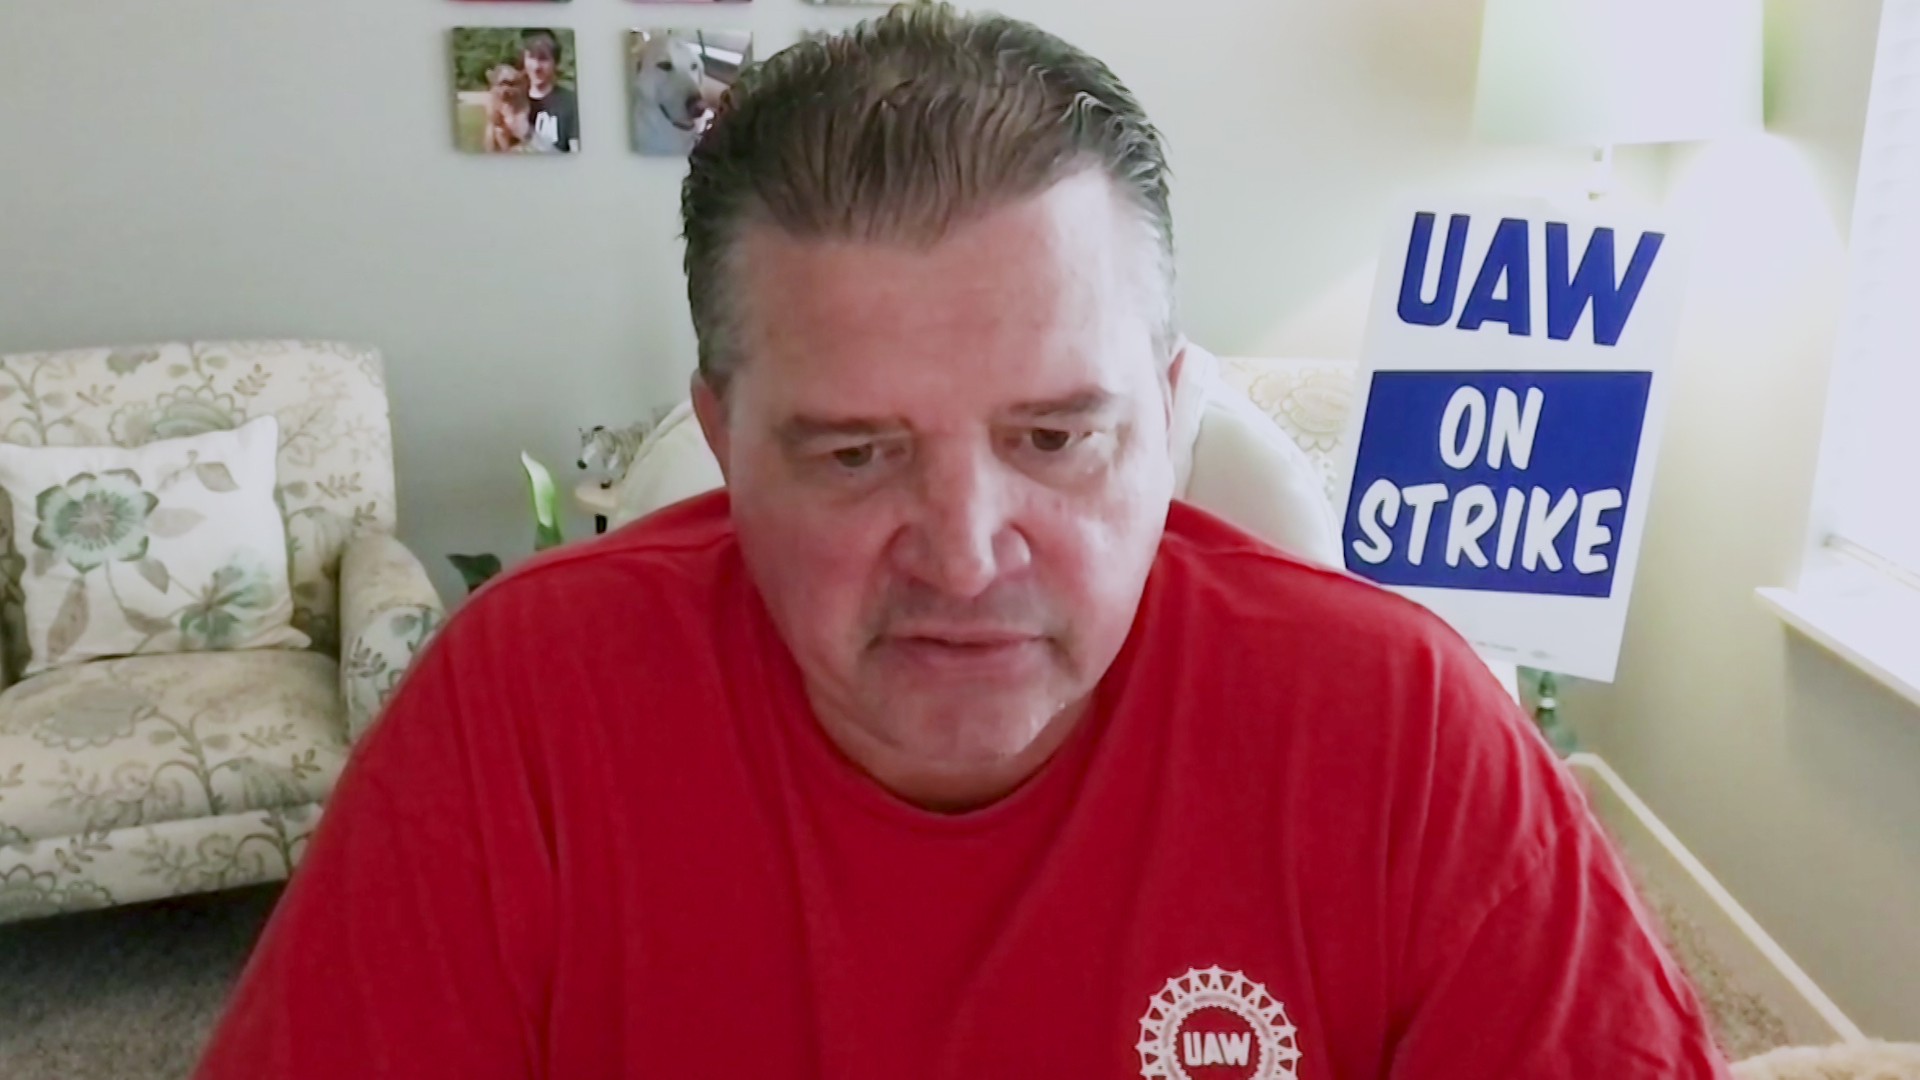 Steve Frisque speaks while facing a computer camera in a room with a lamp, furniture, photos on the wall, and a placard reading "UAW On Strike."